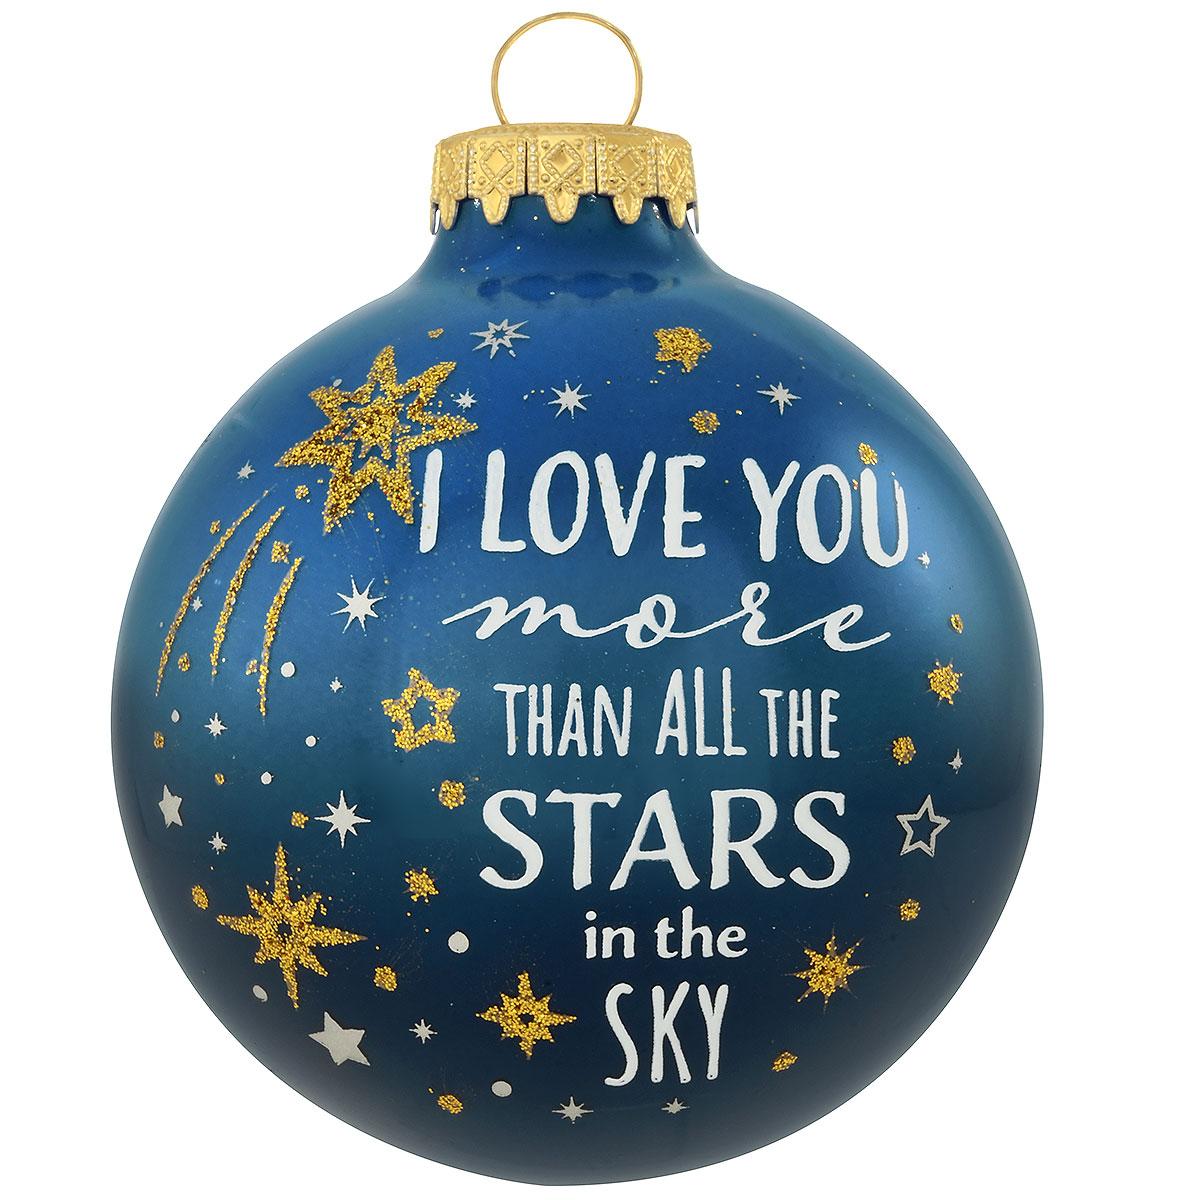 More Than All The Stars Ornament